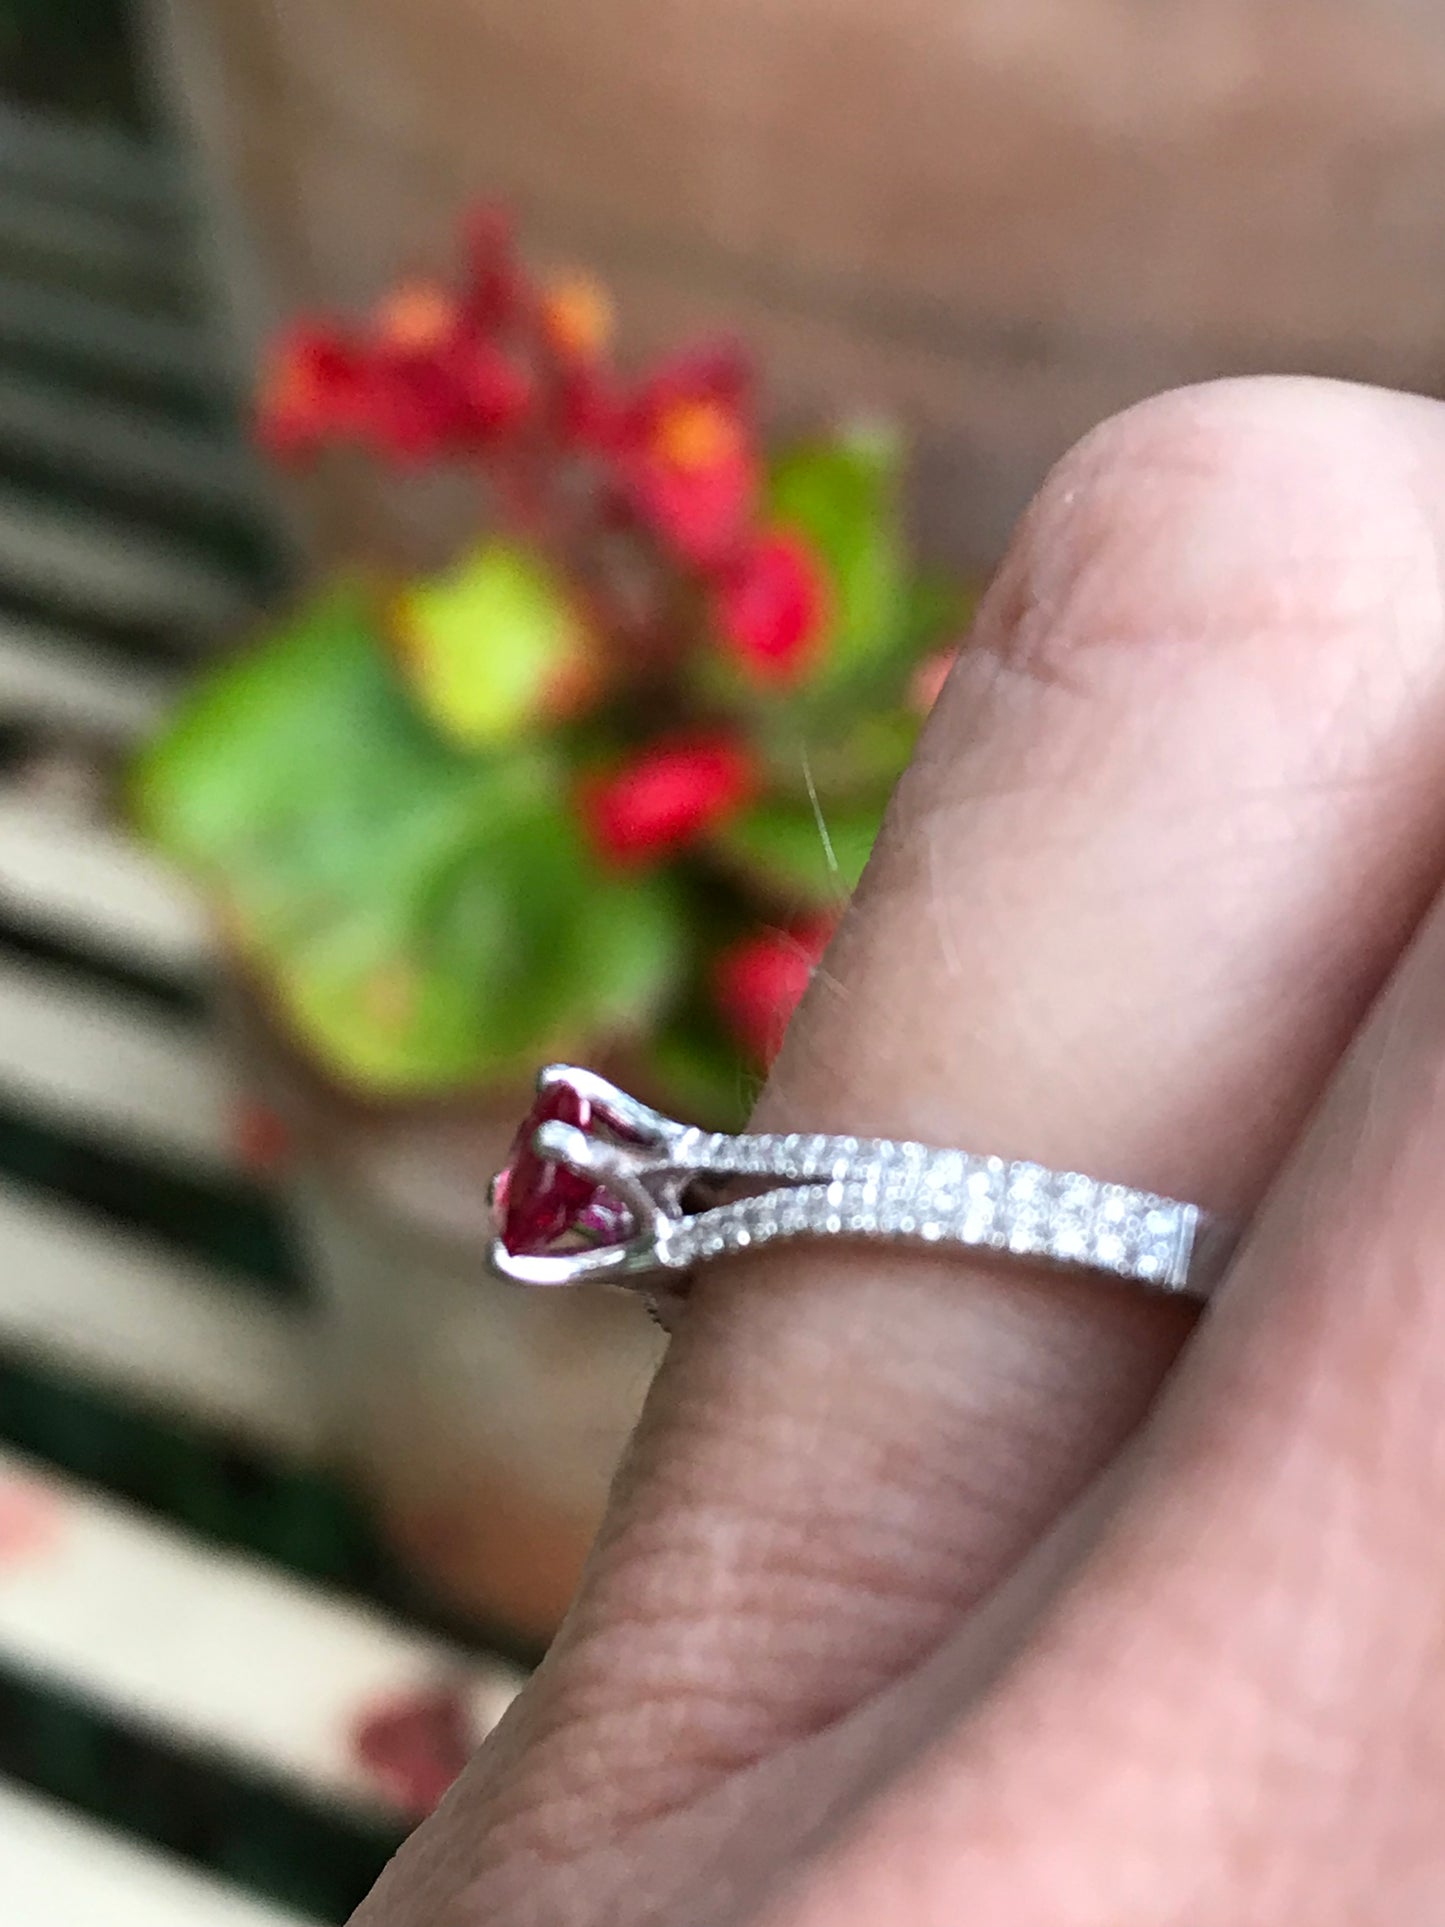 Platinum ruby ring with diamond set shoulders Ring Rock Lobster   